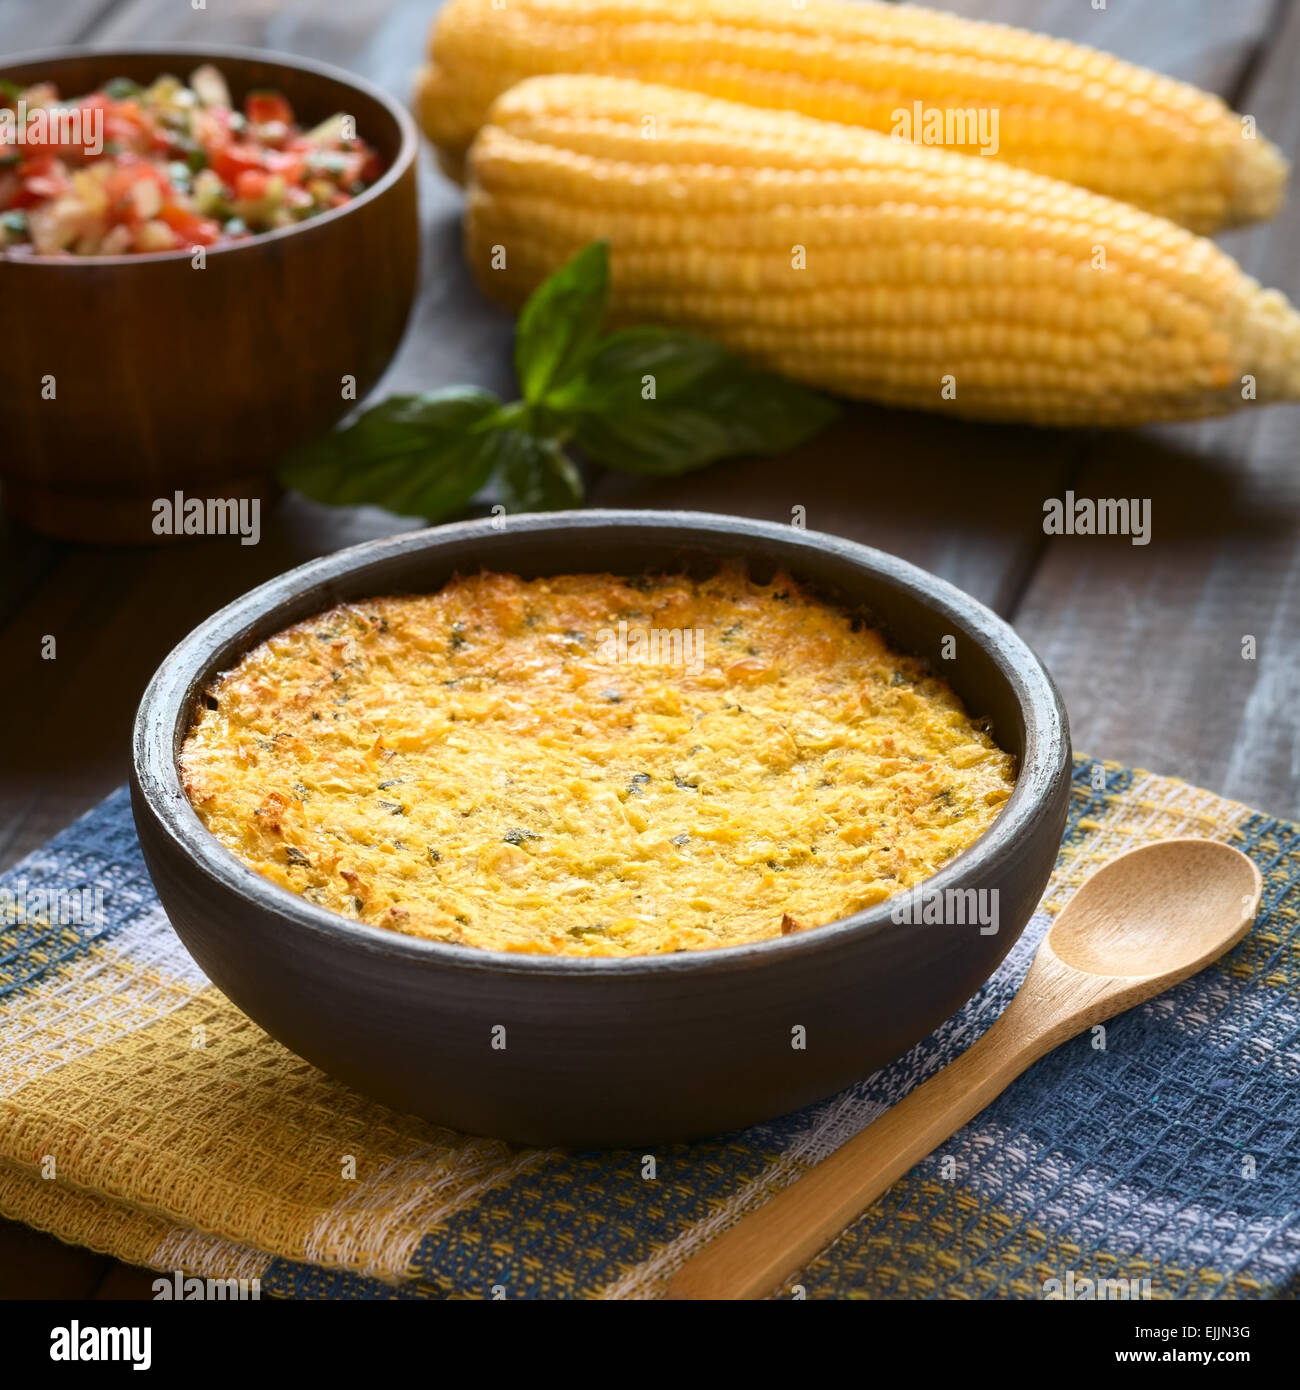 Bowl of traditional Chilean corn pie called Pastel de Choclo served with Pebre sauce in the back, photographed on cloth Stock Photo